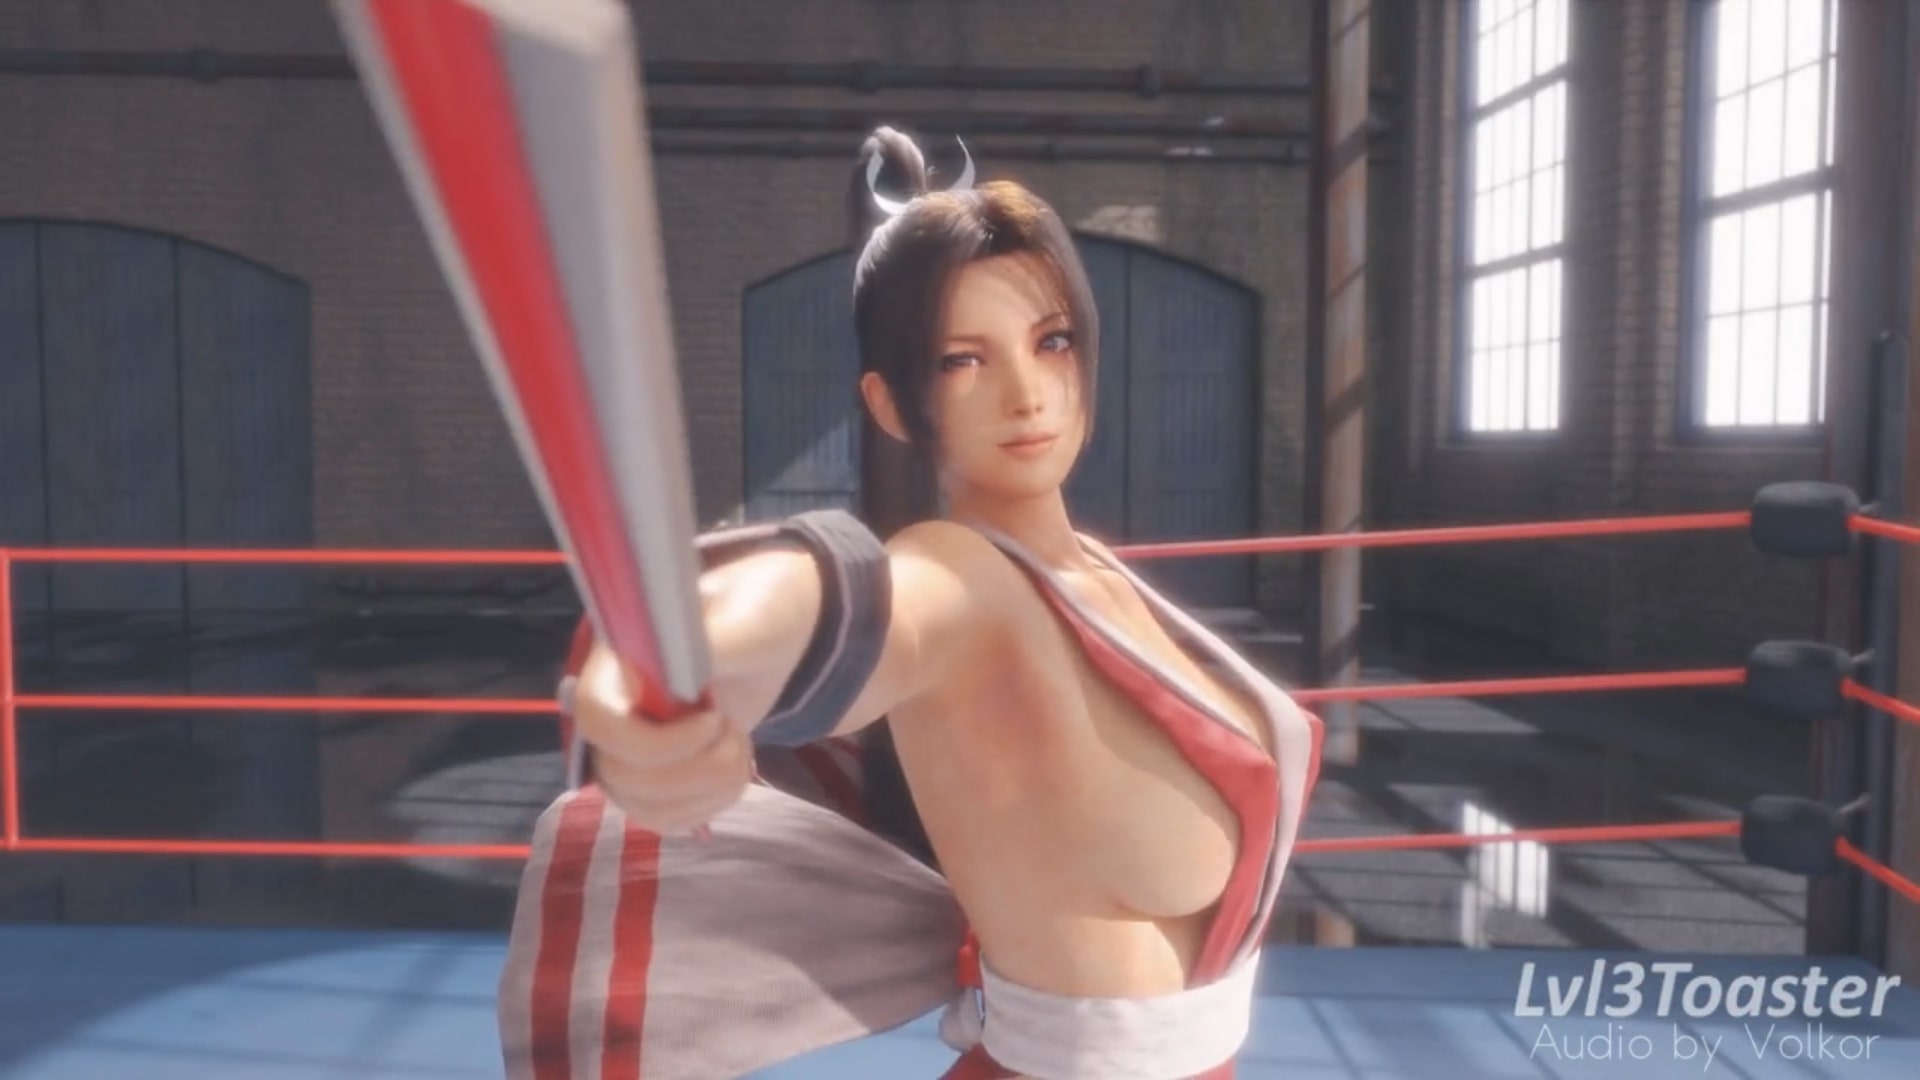 Mai Shiranui Ready for Fight by lvl3toaster | King of Fighters